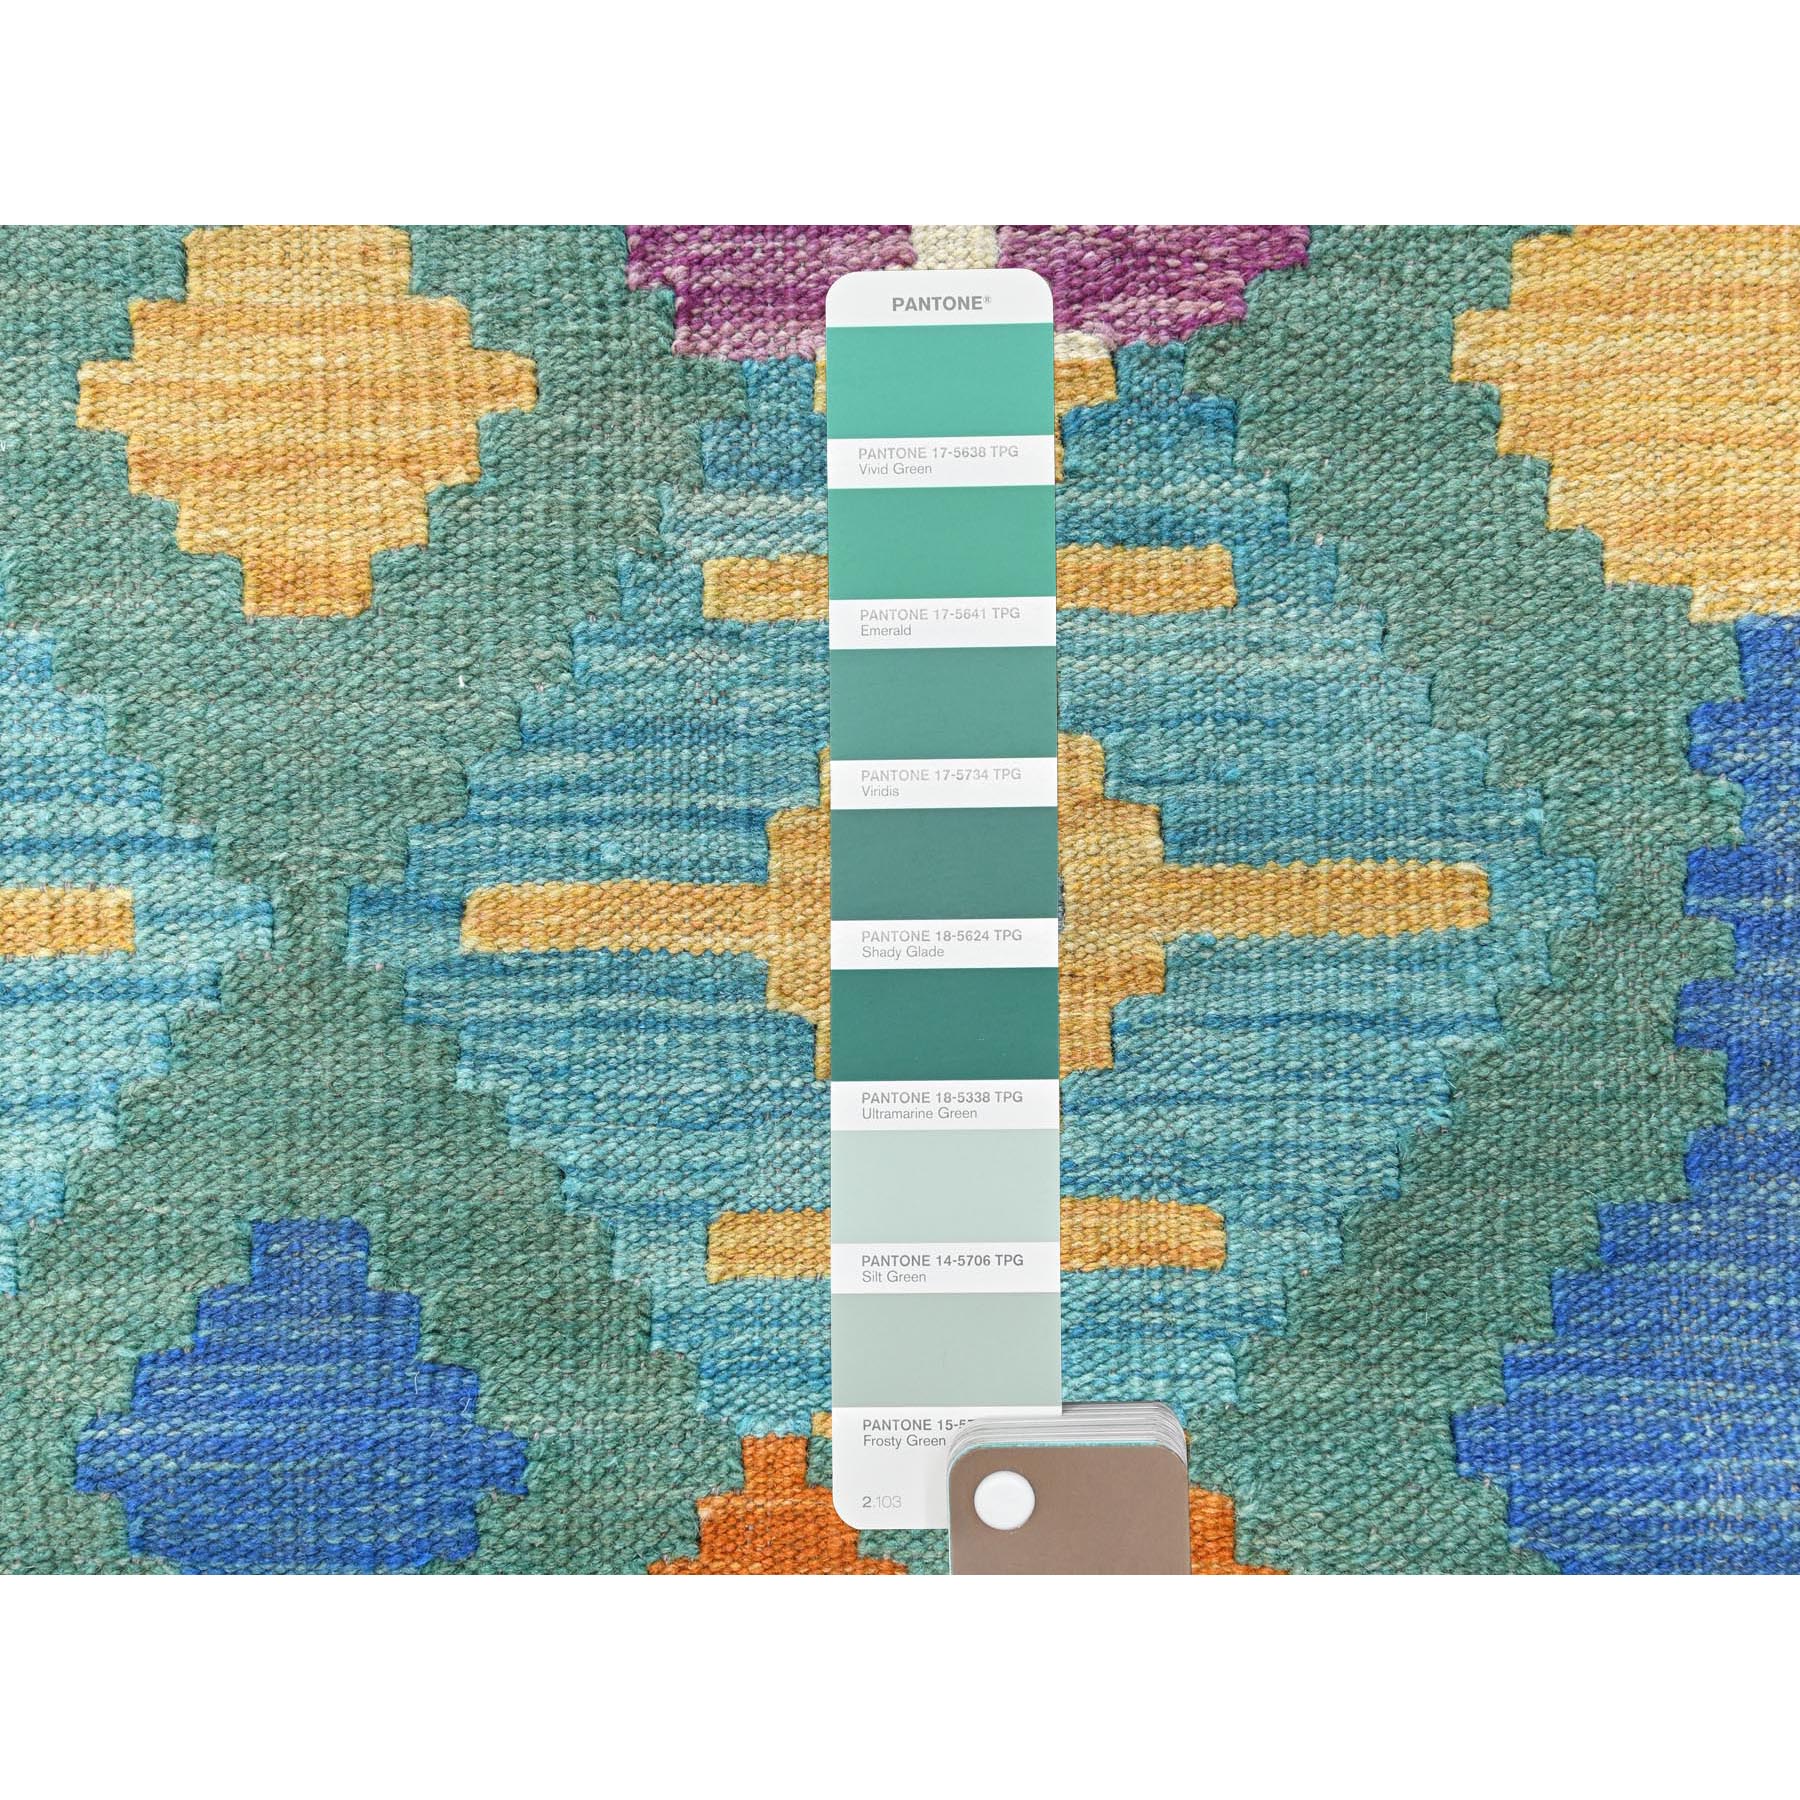 2'8"x16' Colorful, Hand Woven, Afghan Kilim with Geometric Design, Pure Wool, Vegetable Dyes, Flat Weave, Reversible XL Runner Oriental Rug 